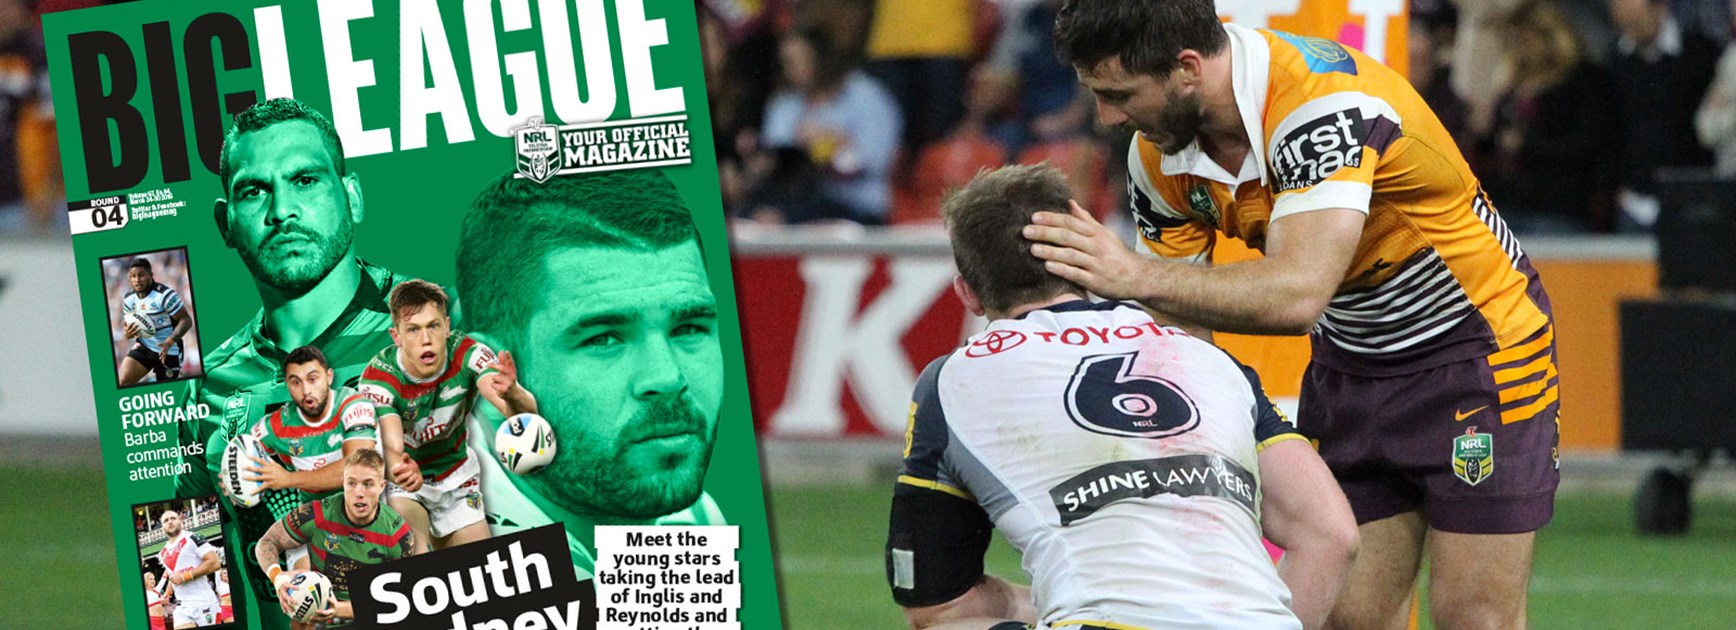 Brent Tate says the Broncos and Cowboys are two of the NRL's best coached teams in this week's Big League magazine.